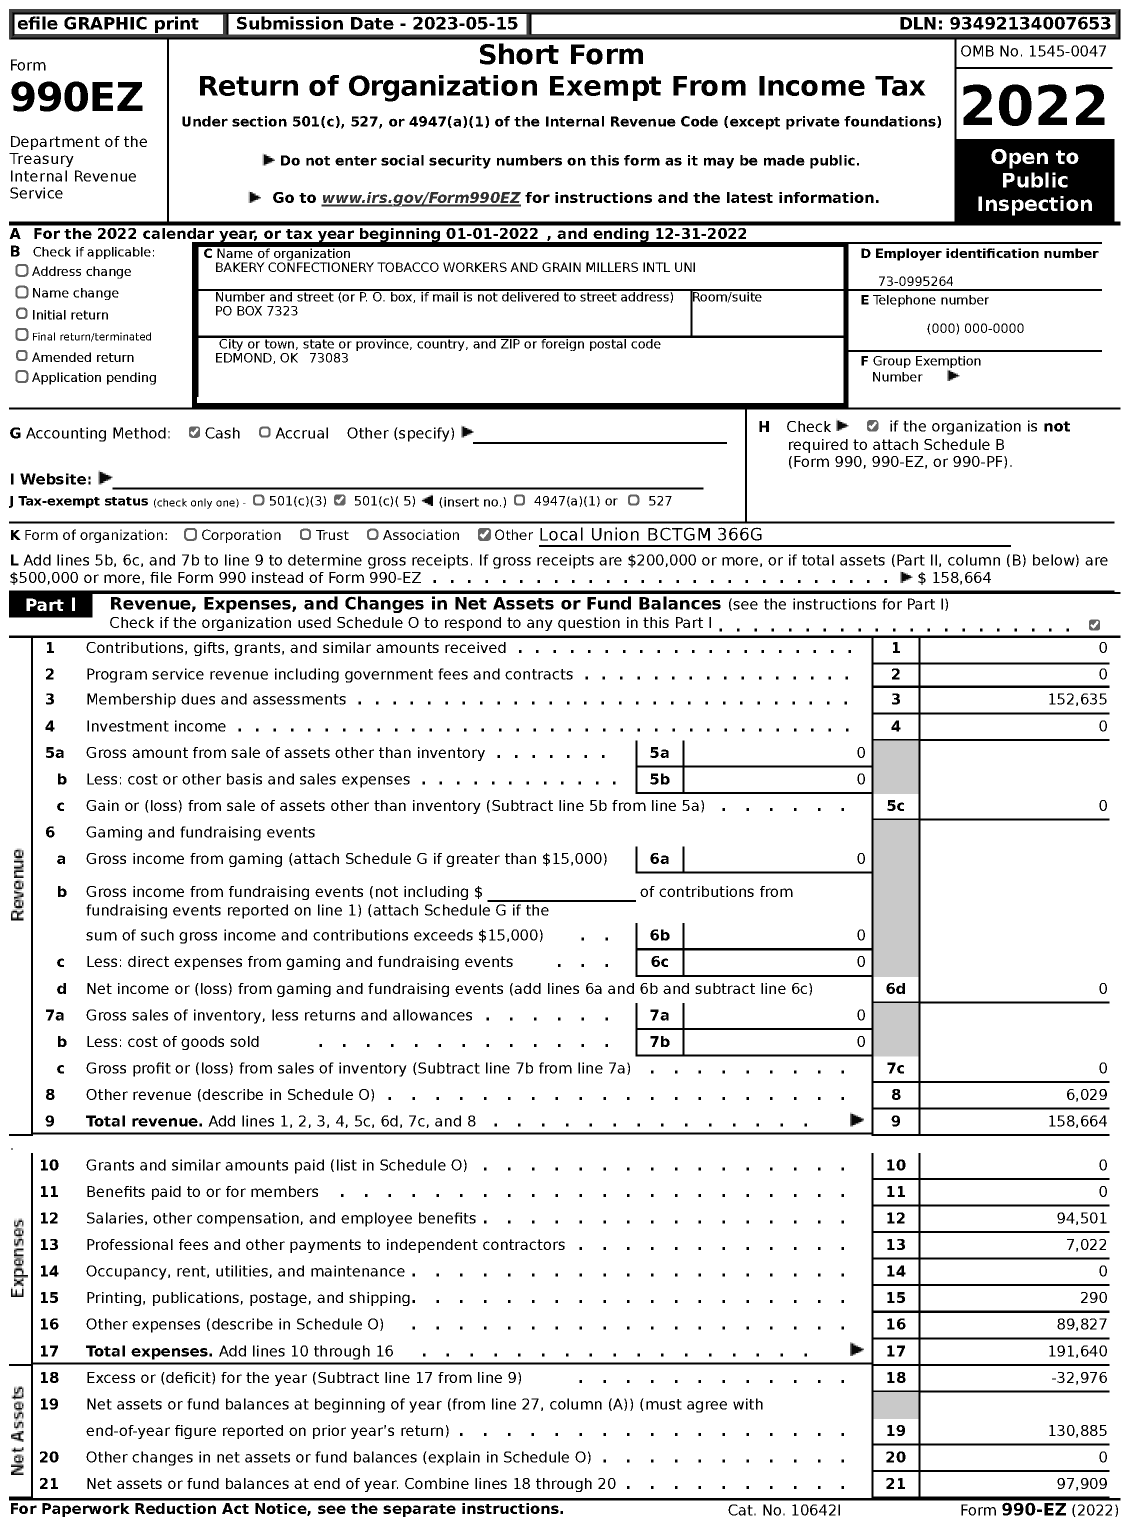 Image of first page of 2022 Form 990EZ for BCTGM International Union - 366g